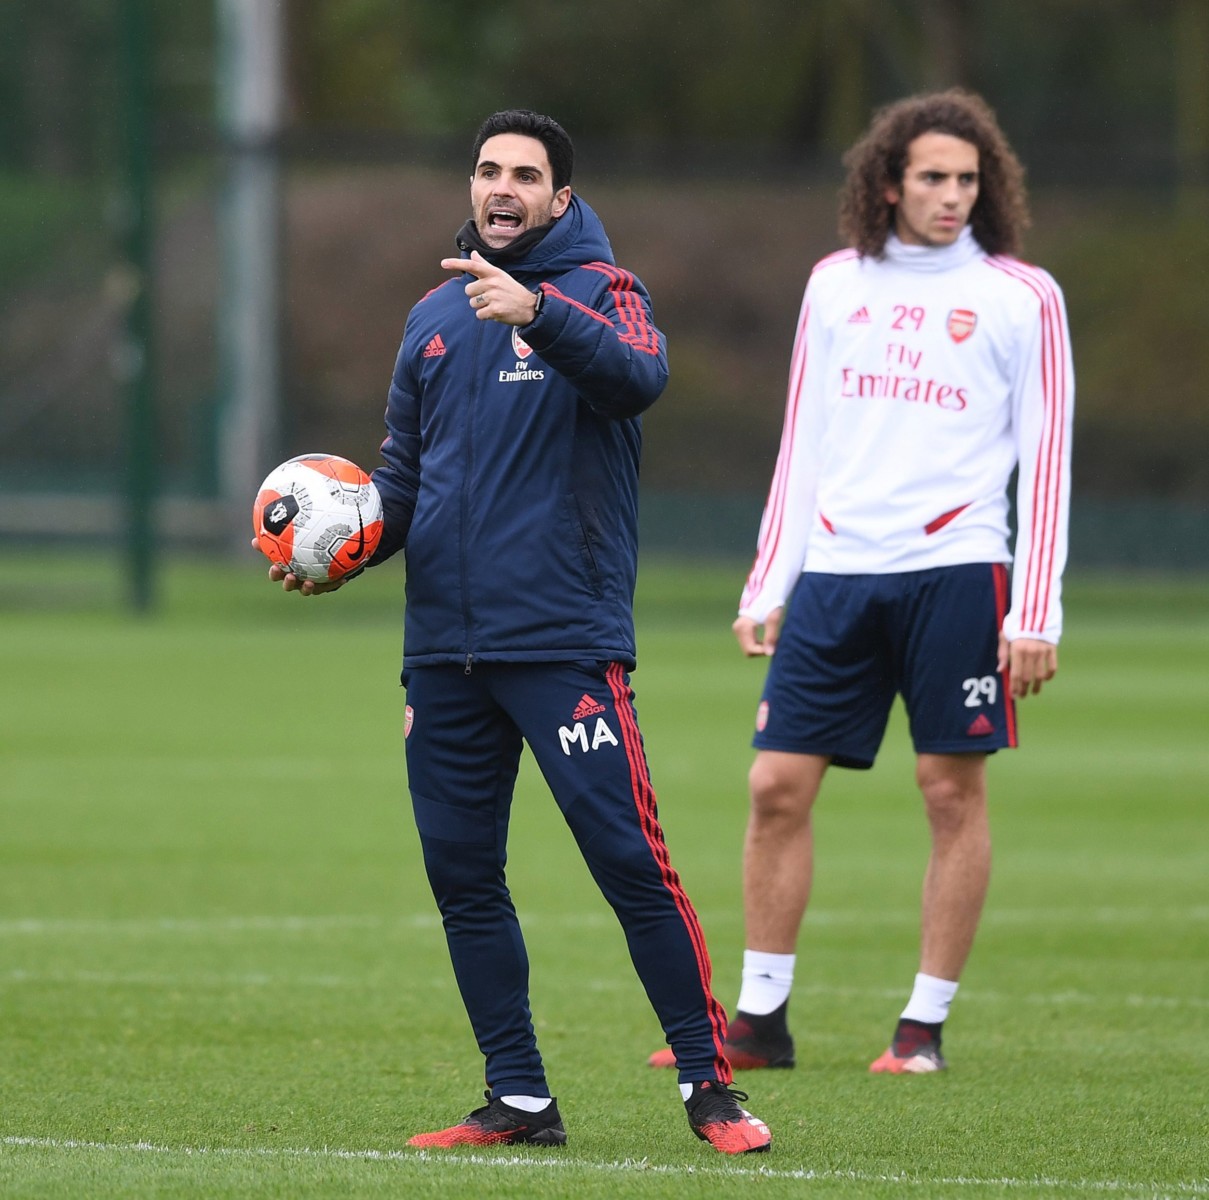 Emirates boss Mikel Arteta admits young players in particular need care as they are getting bored during the lockdown away from normal training